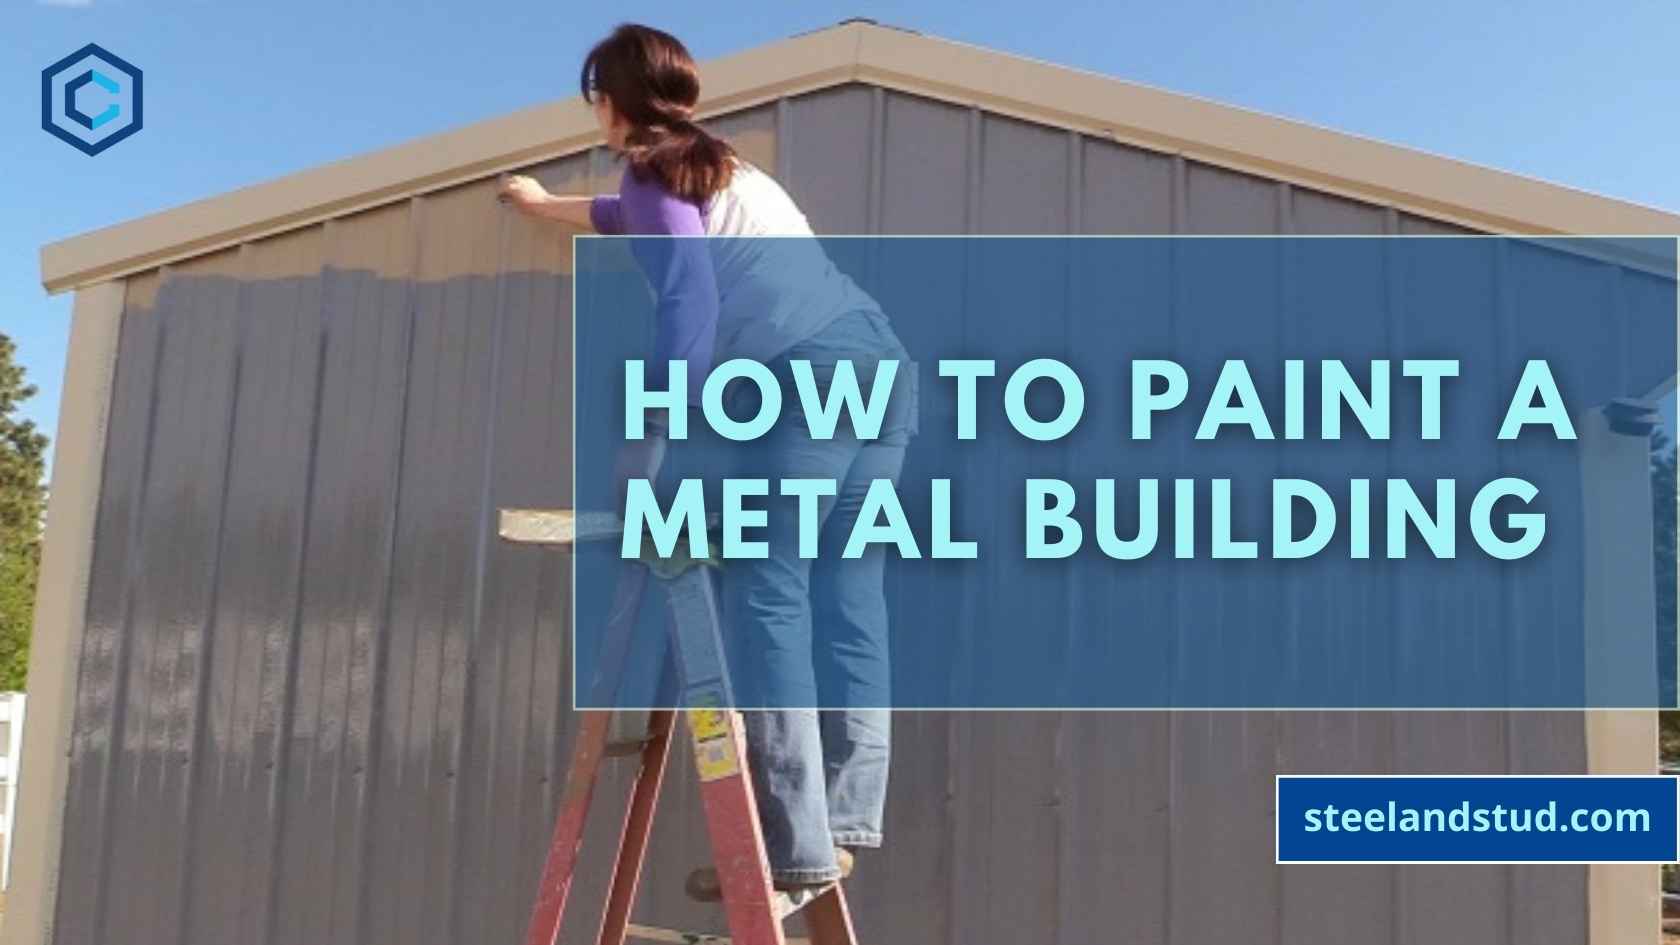 How to Paint a Metal Building